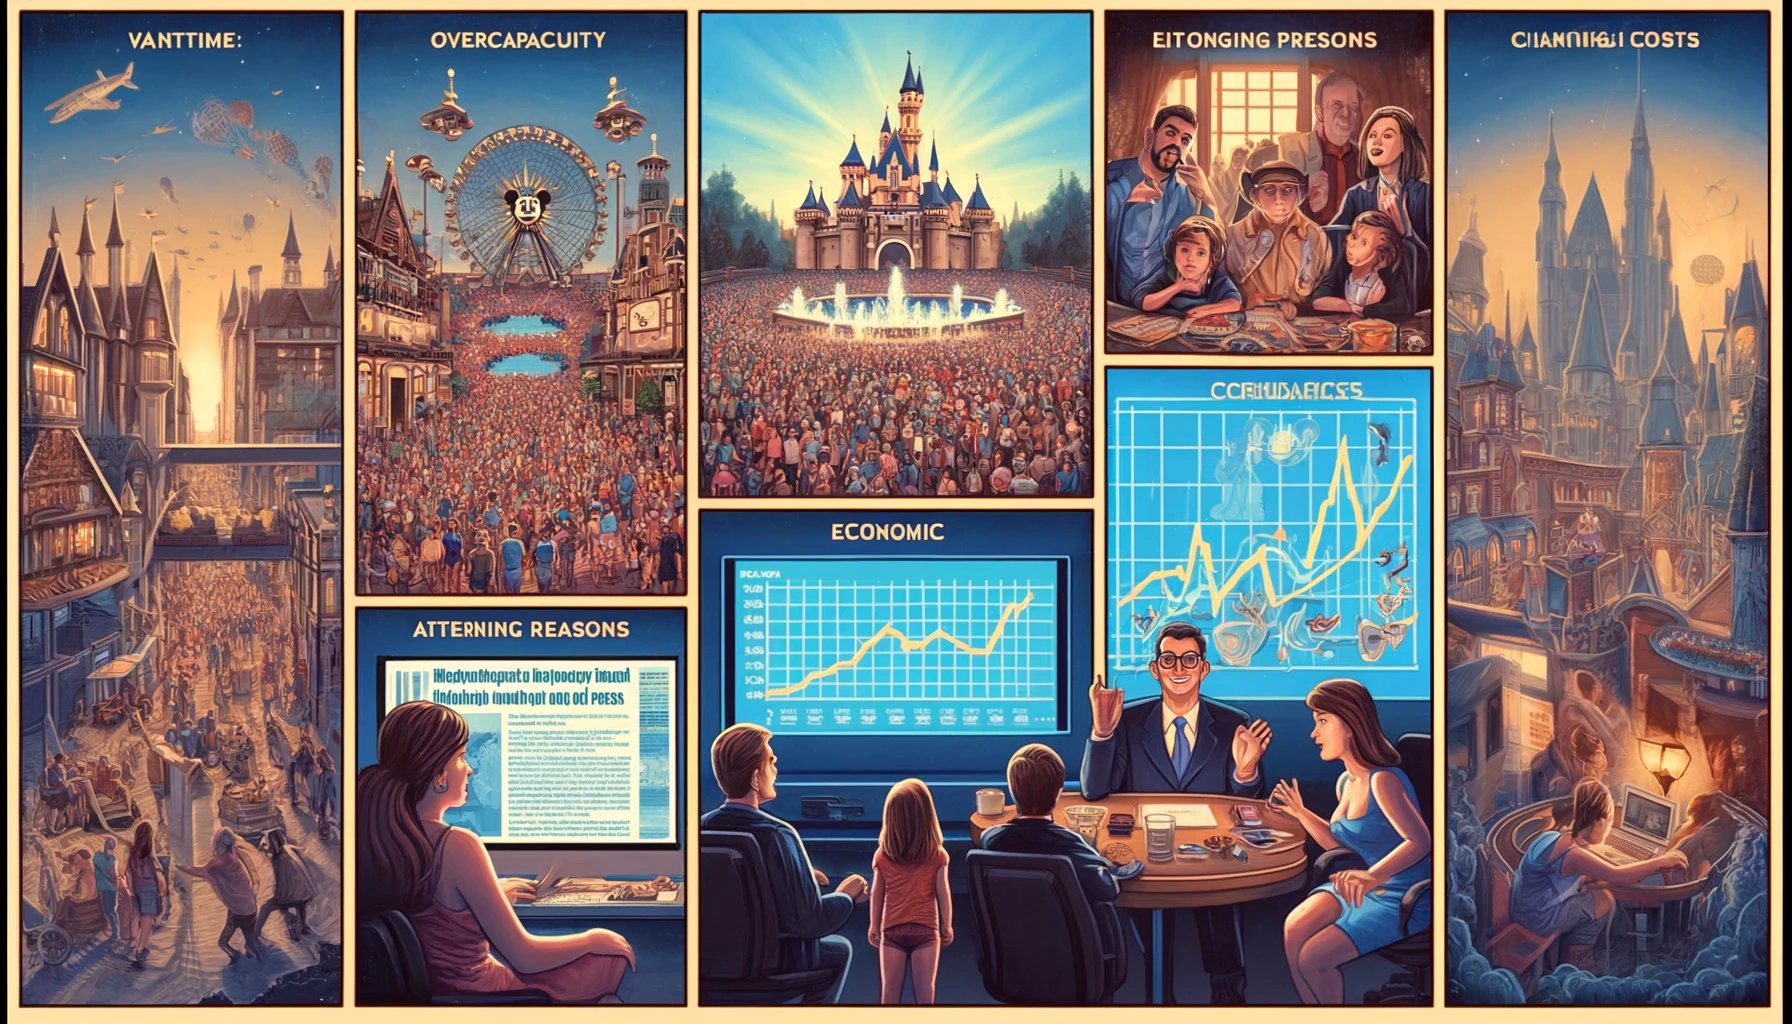 An illustrative scene showing various reasons for the discontinuation of Disney annual passes. The image is divided into three panels. The first panel depicts a crowded Disney park with visitors looking uncomfortable and overwhelmed, representing overcapacity issues. The second panel shows Disney executives in a boardroom with financial charts displaying rising costs, symbolizing economic reasons. The third panel features a family at home looking at alternative vacation options on a computer, indicating changing consumer preferences. Each panel is detailed and visually distinct, conveying the complex factors involved.